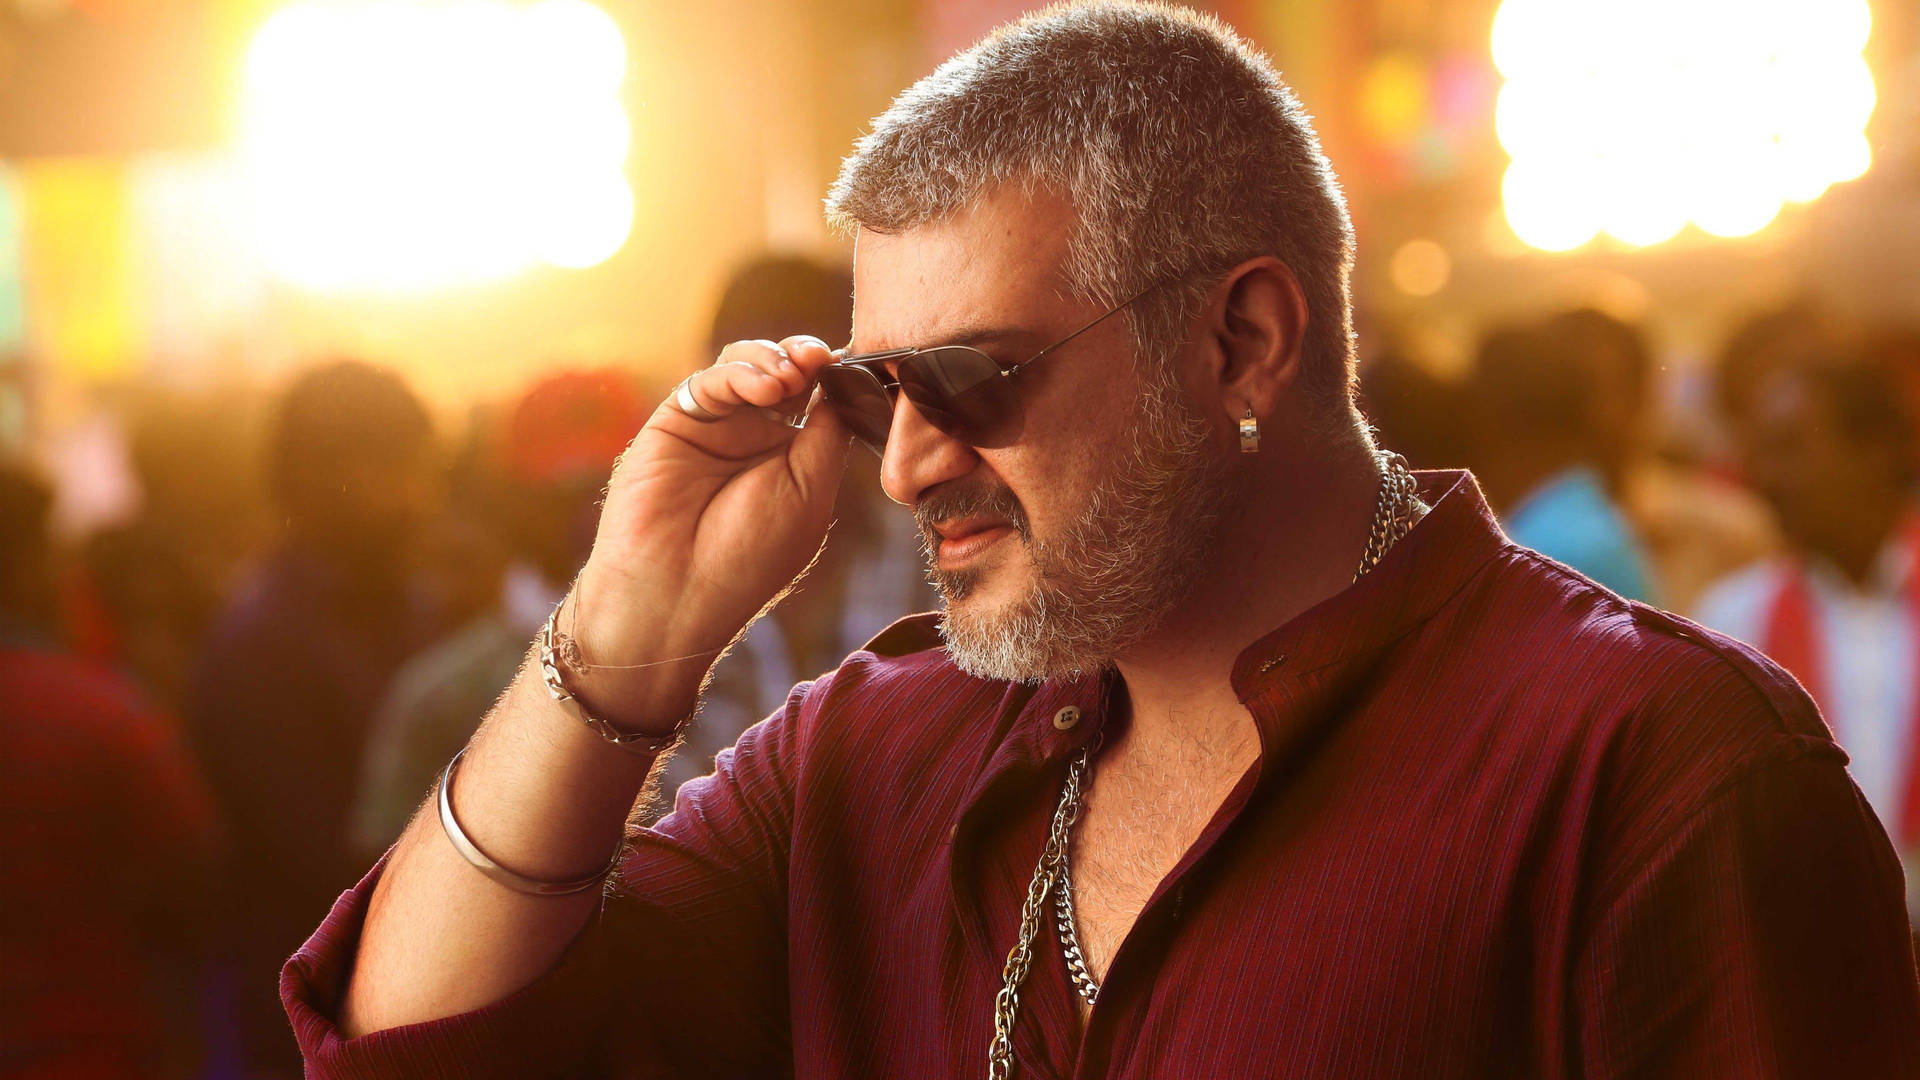 A Stunning High Definition Shot Of The Renowned Actor, Ajith Kumar.